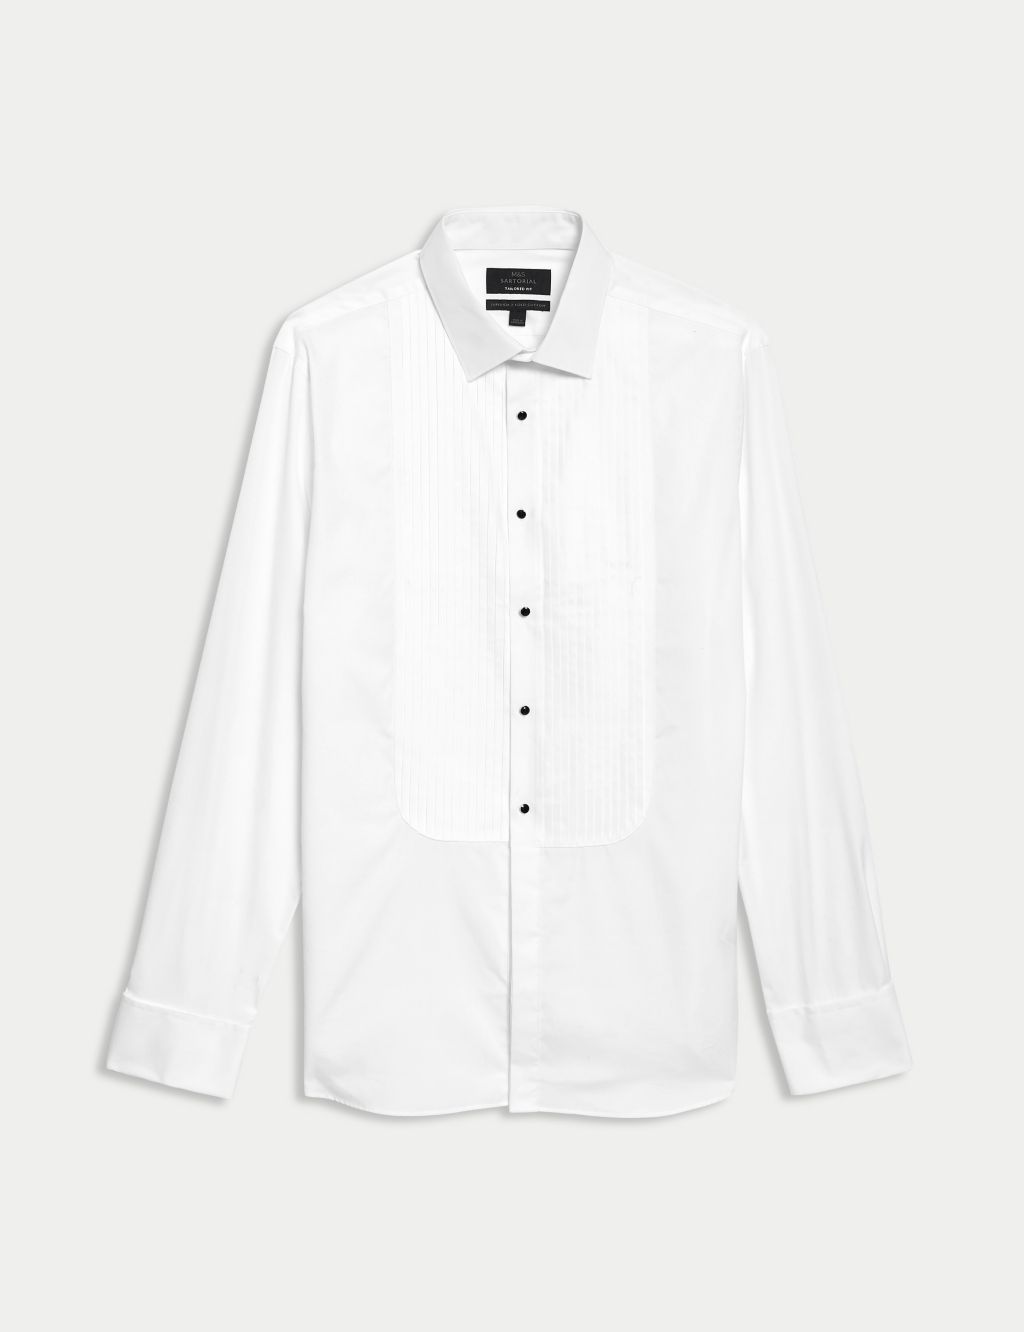 Tailored Fit Easy Iron Pure Cotton Shirt image 1